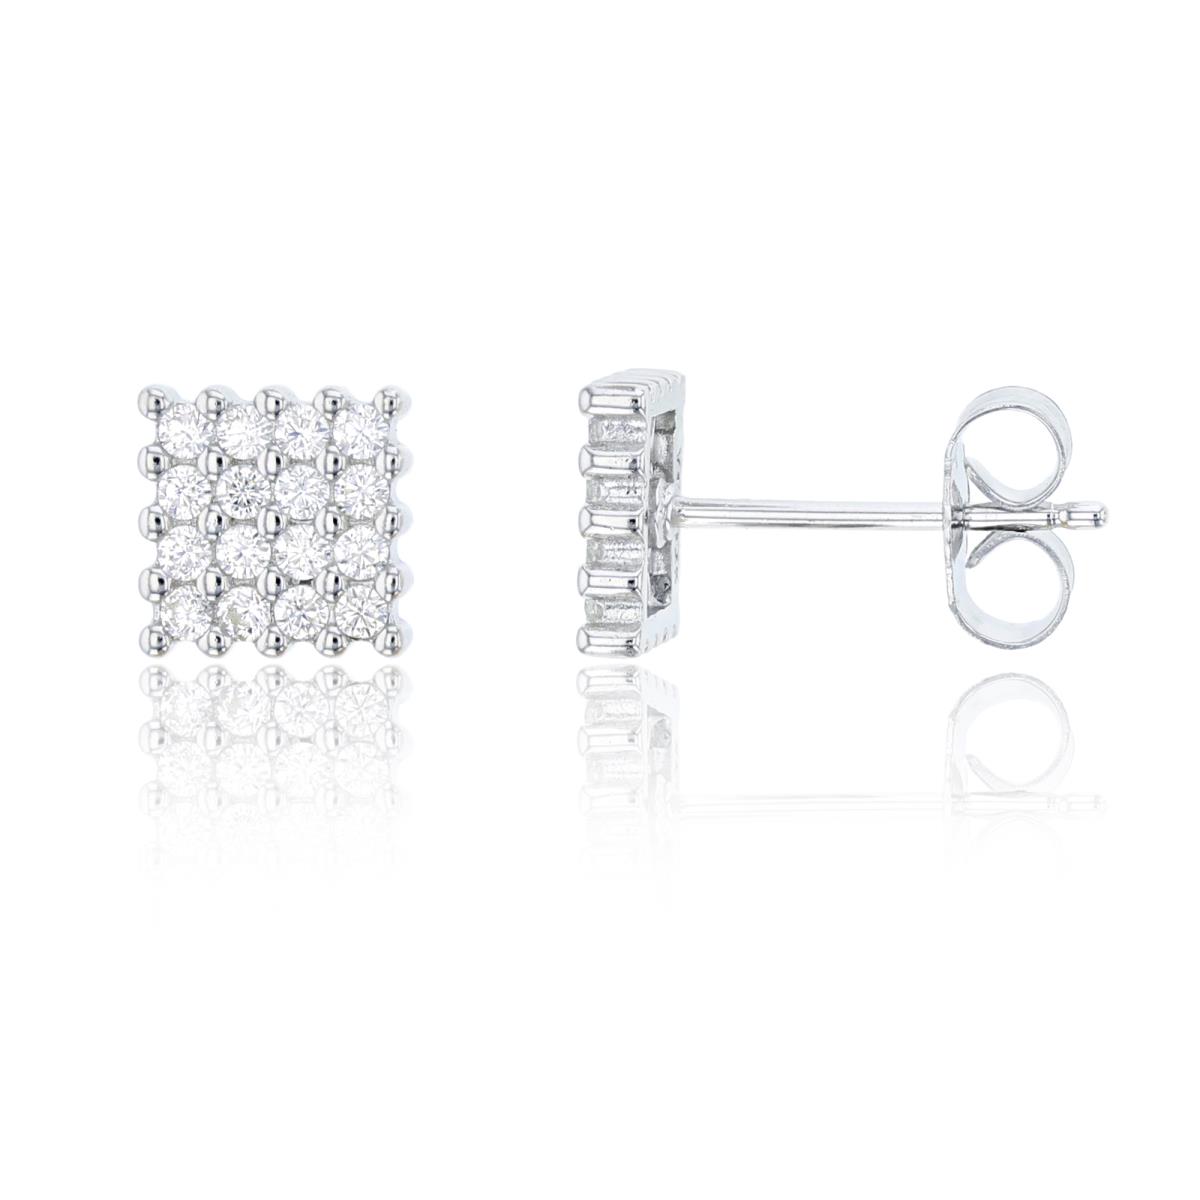 Sterling Silver Rhodium 7x7mm Pave Square Stud Earring